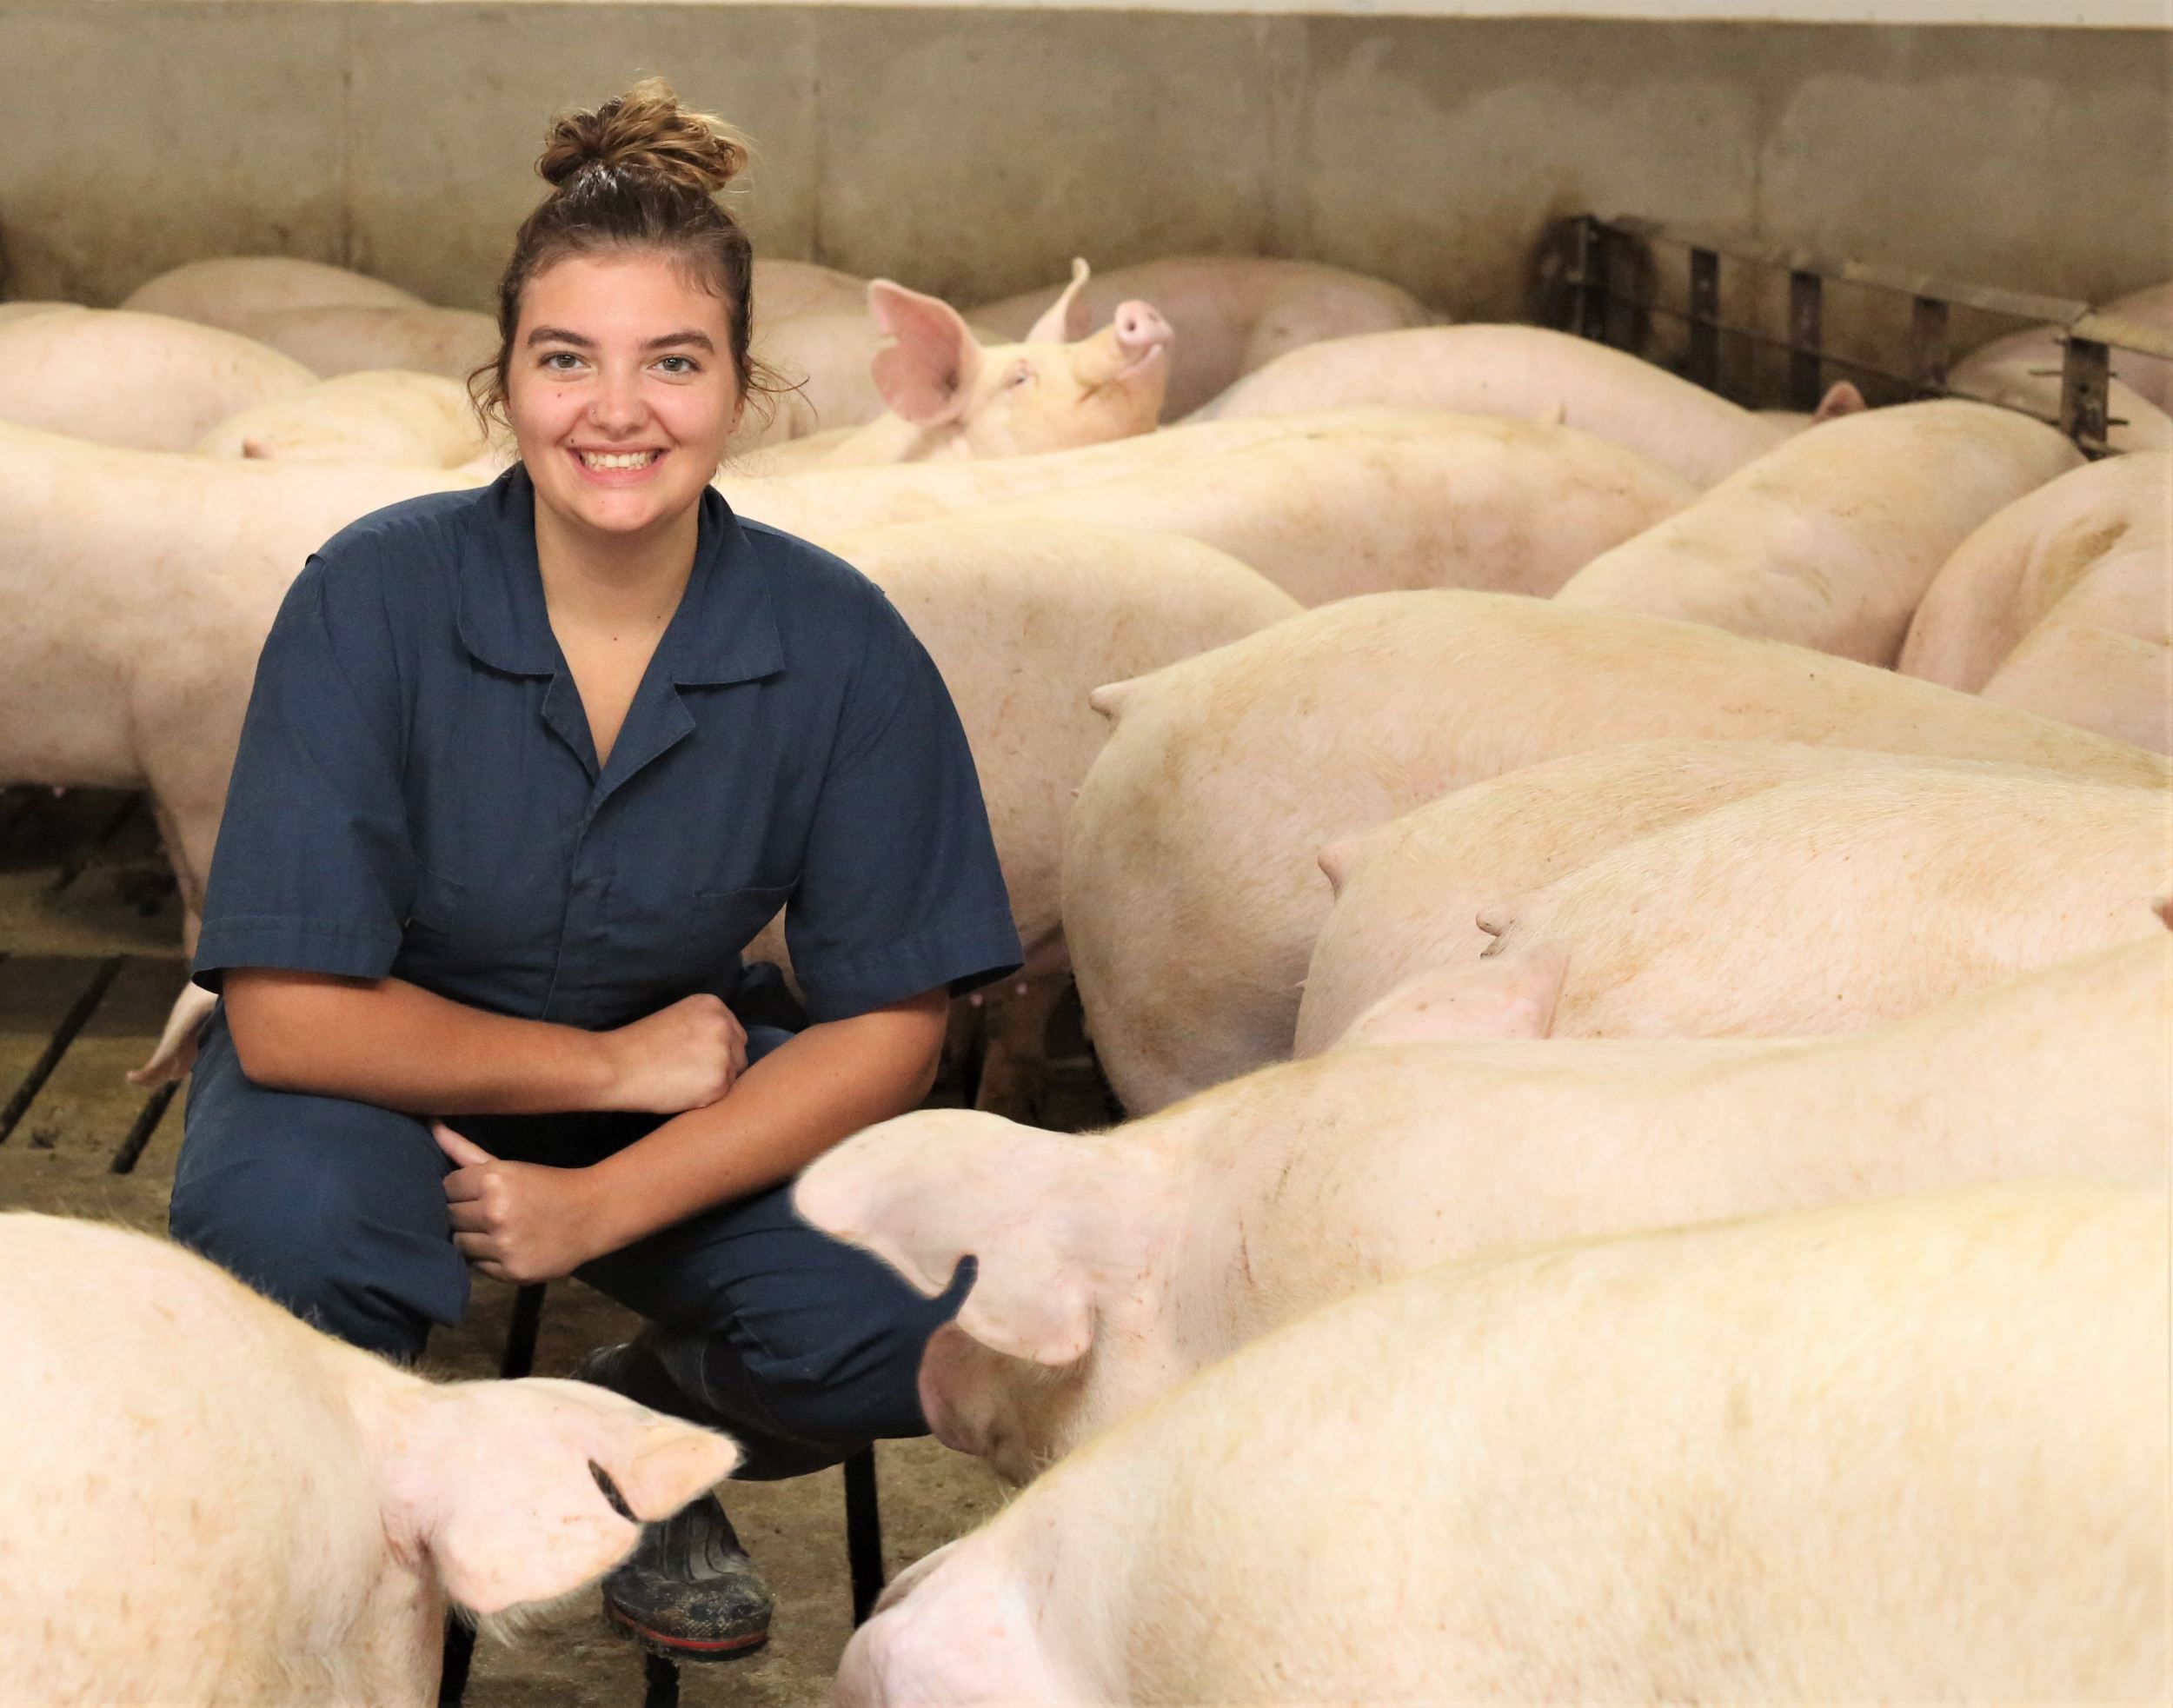 Lexi crouches next to some sows.